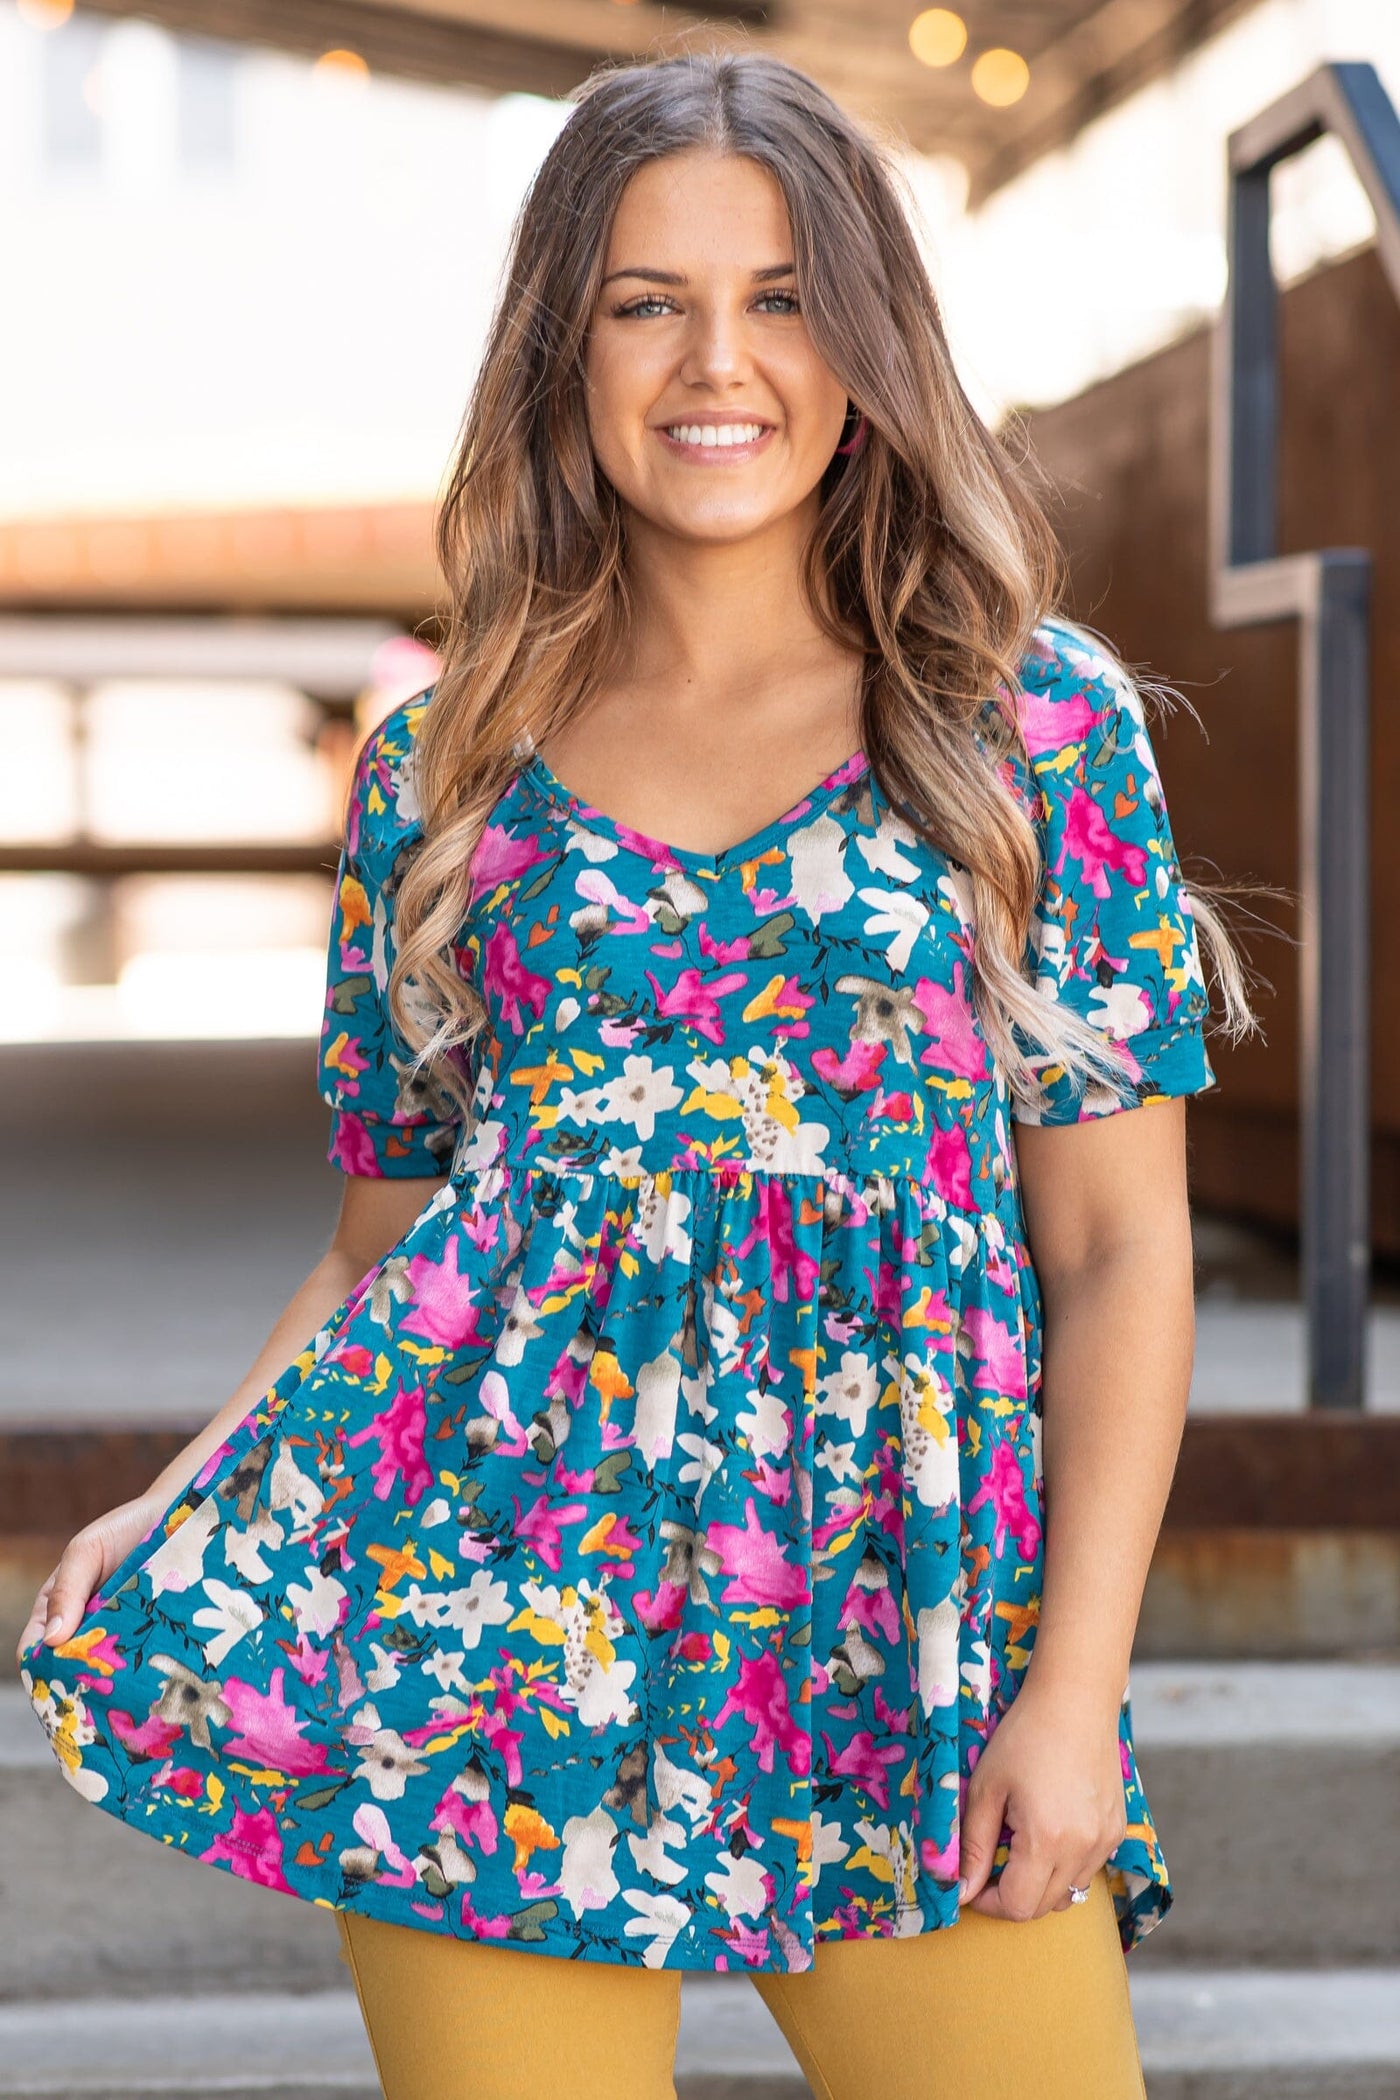 Teal and Fuchsia Floral Print Babydoll Top - Filly Flair